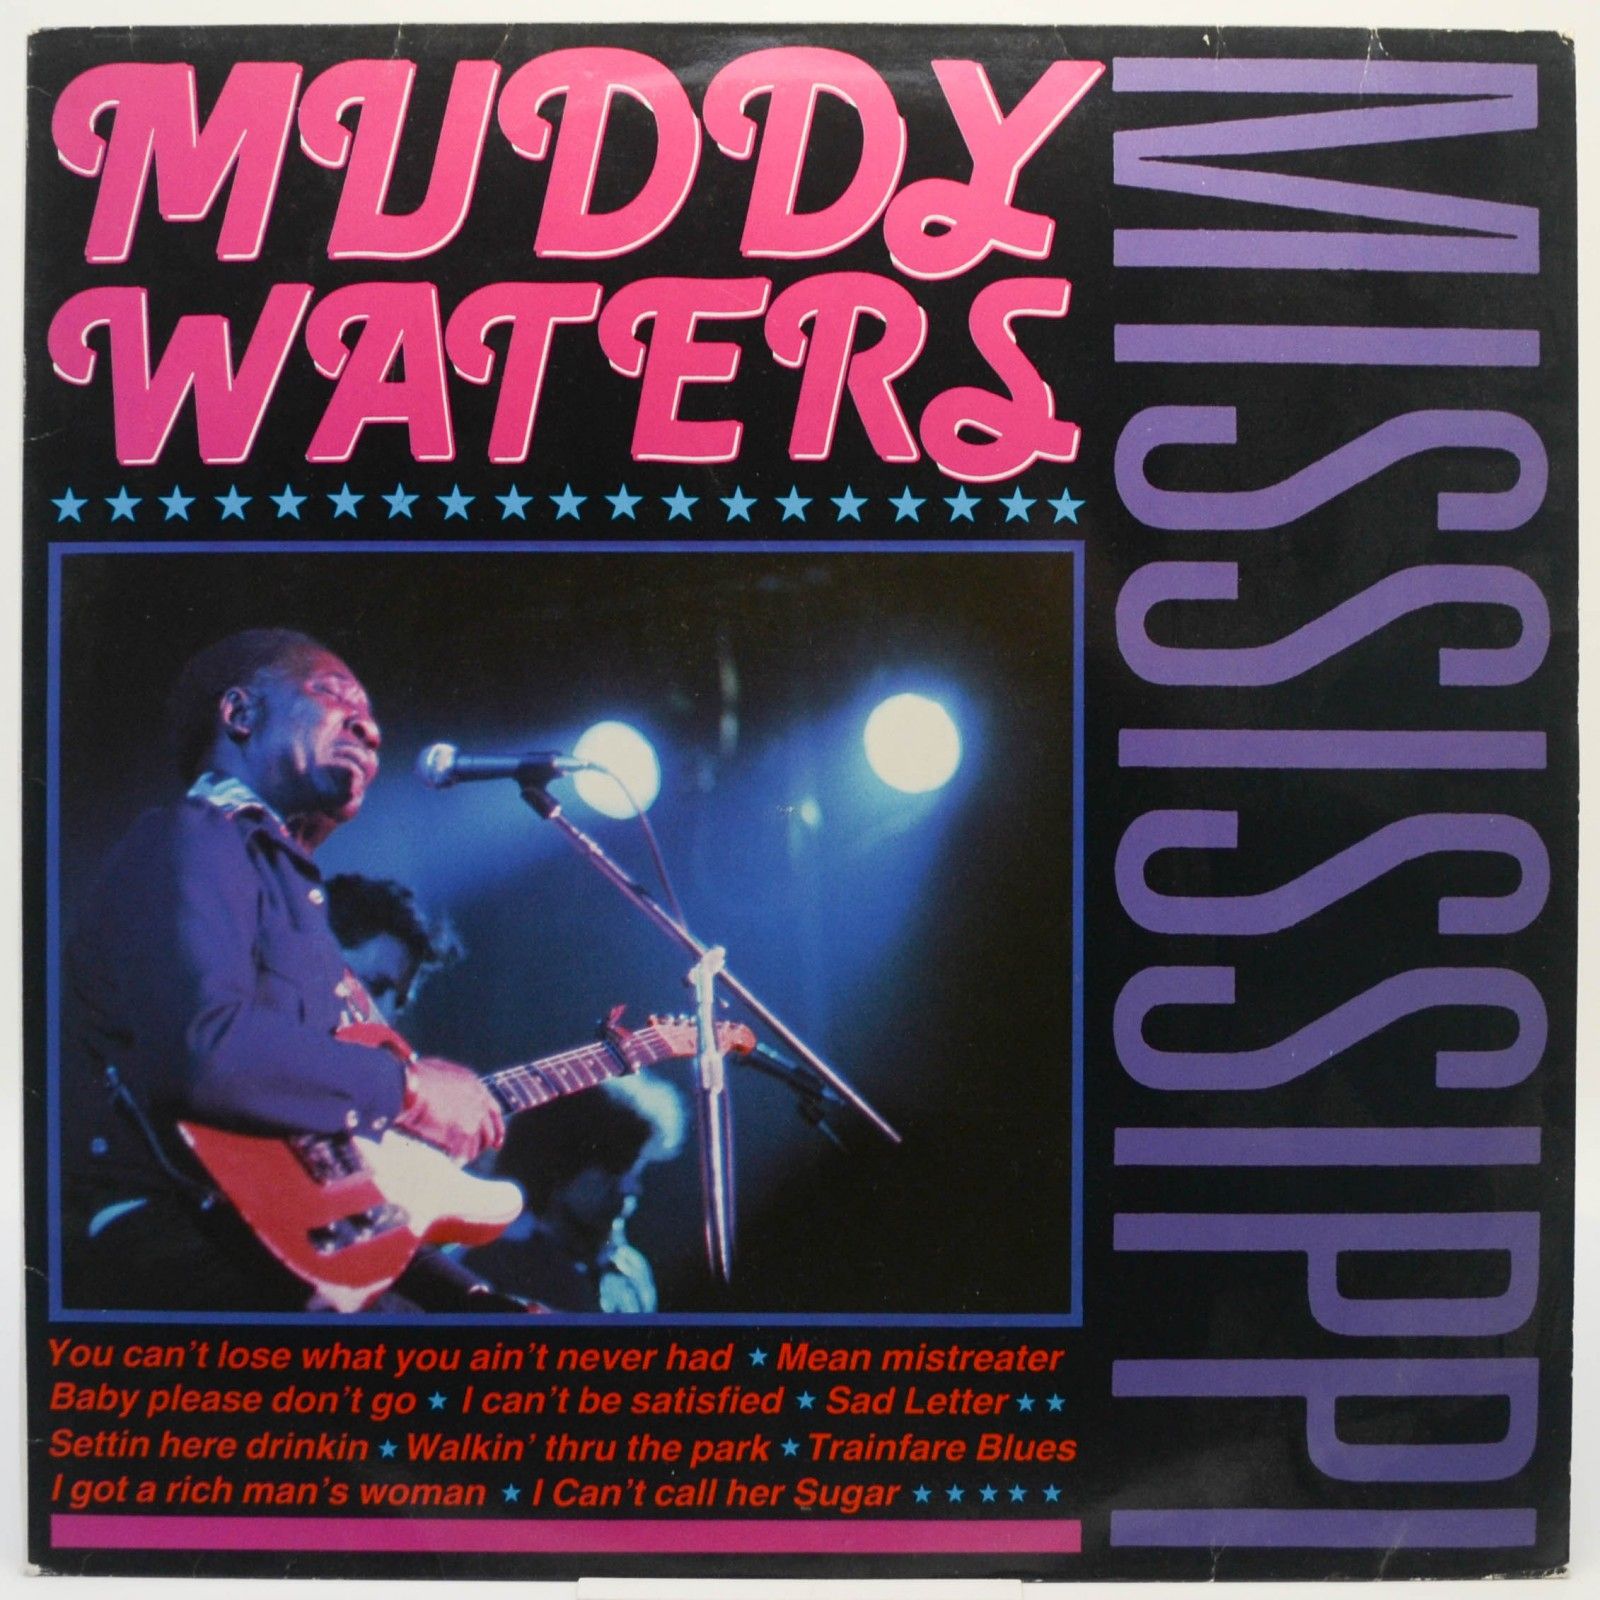 Muddy Waters — Mississippi, 1980